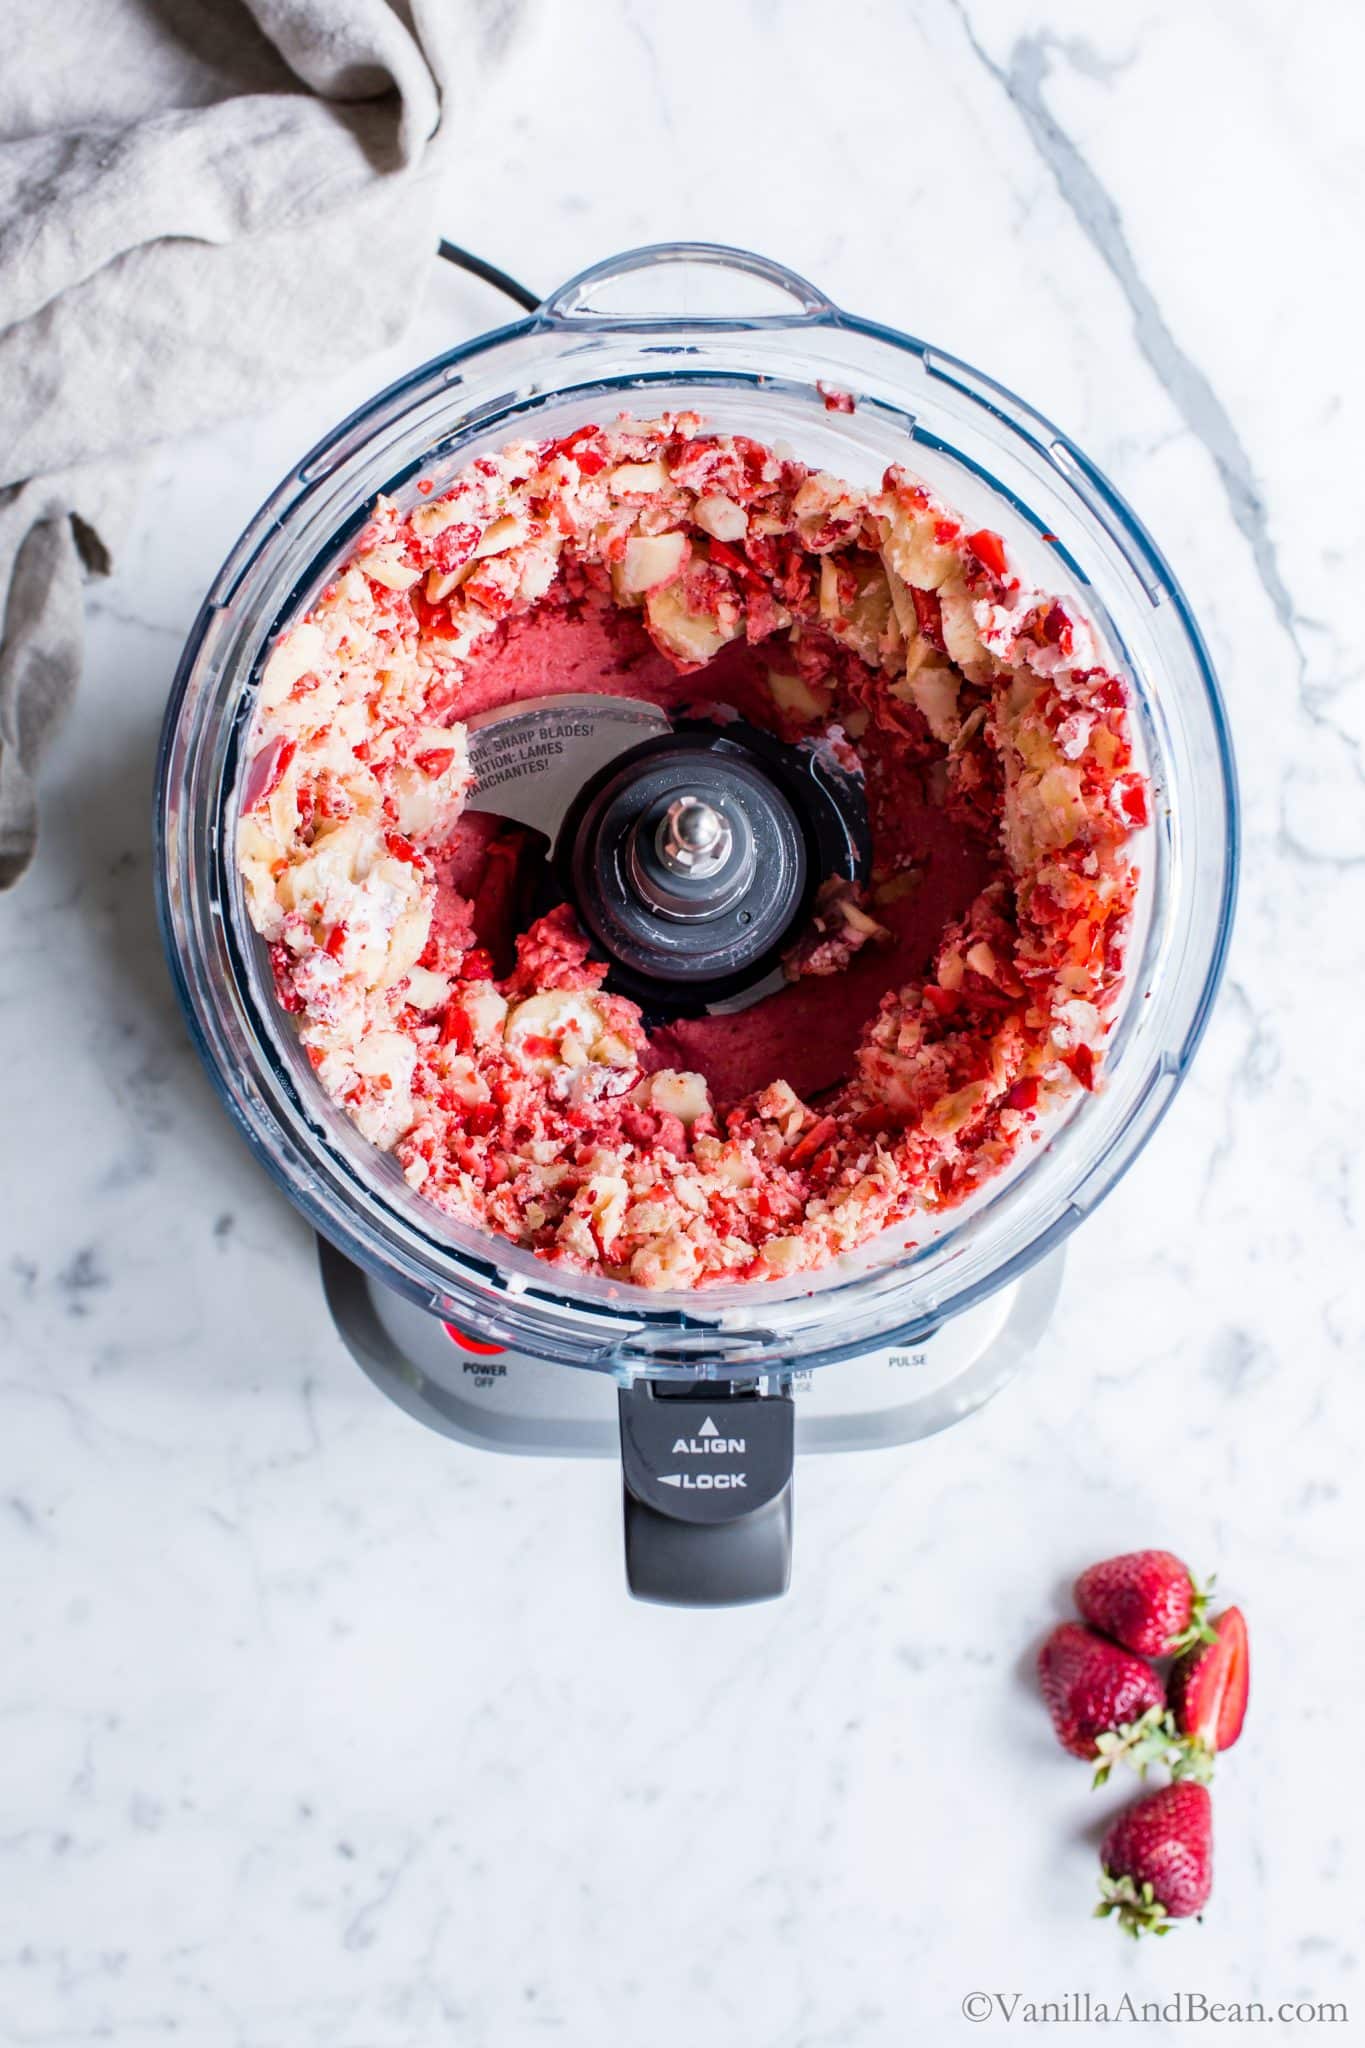 Processing the strawberries, bananas and coconut cream in a food processor. 